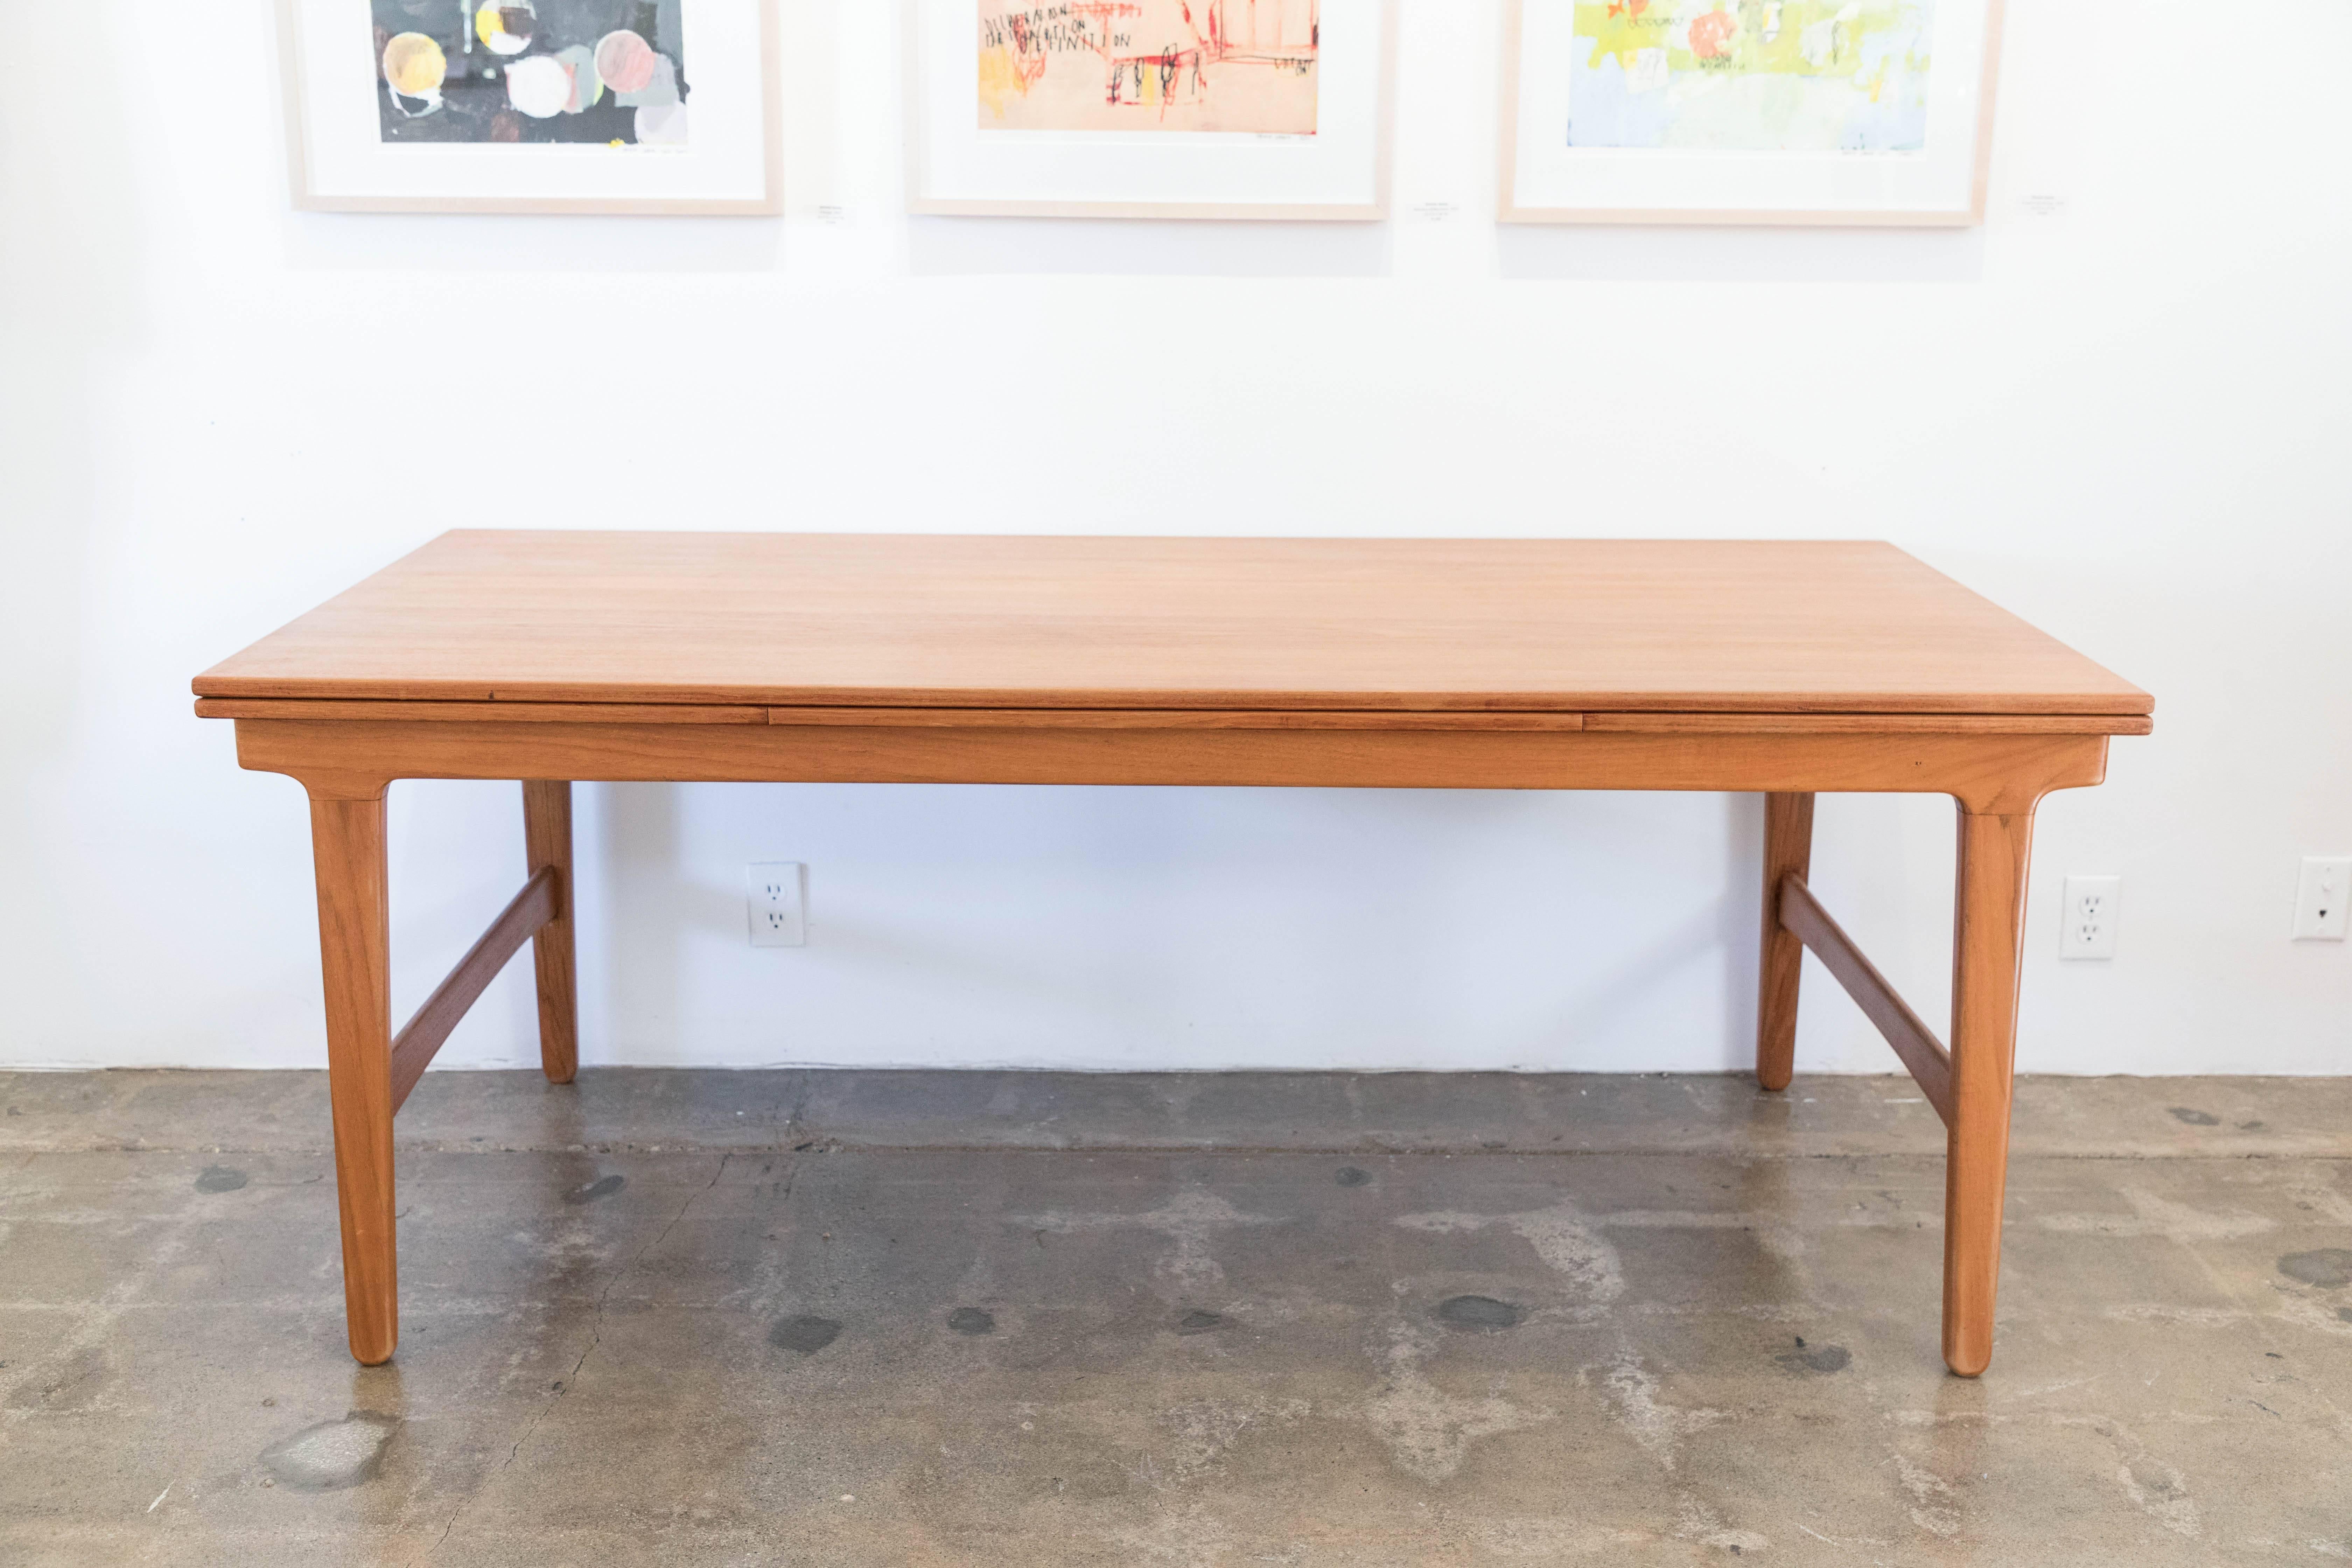 Danish modern expandable dining table with leaves concealed in the body of the table underneath.
Length of table fully extended with leaves is 113